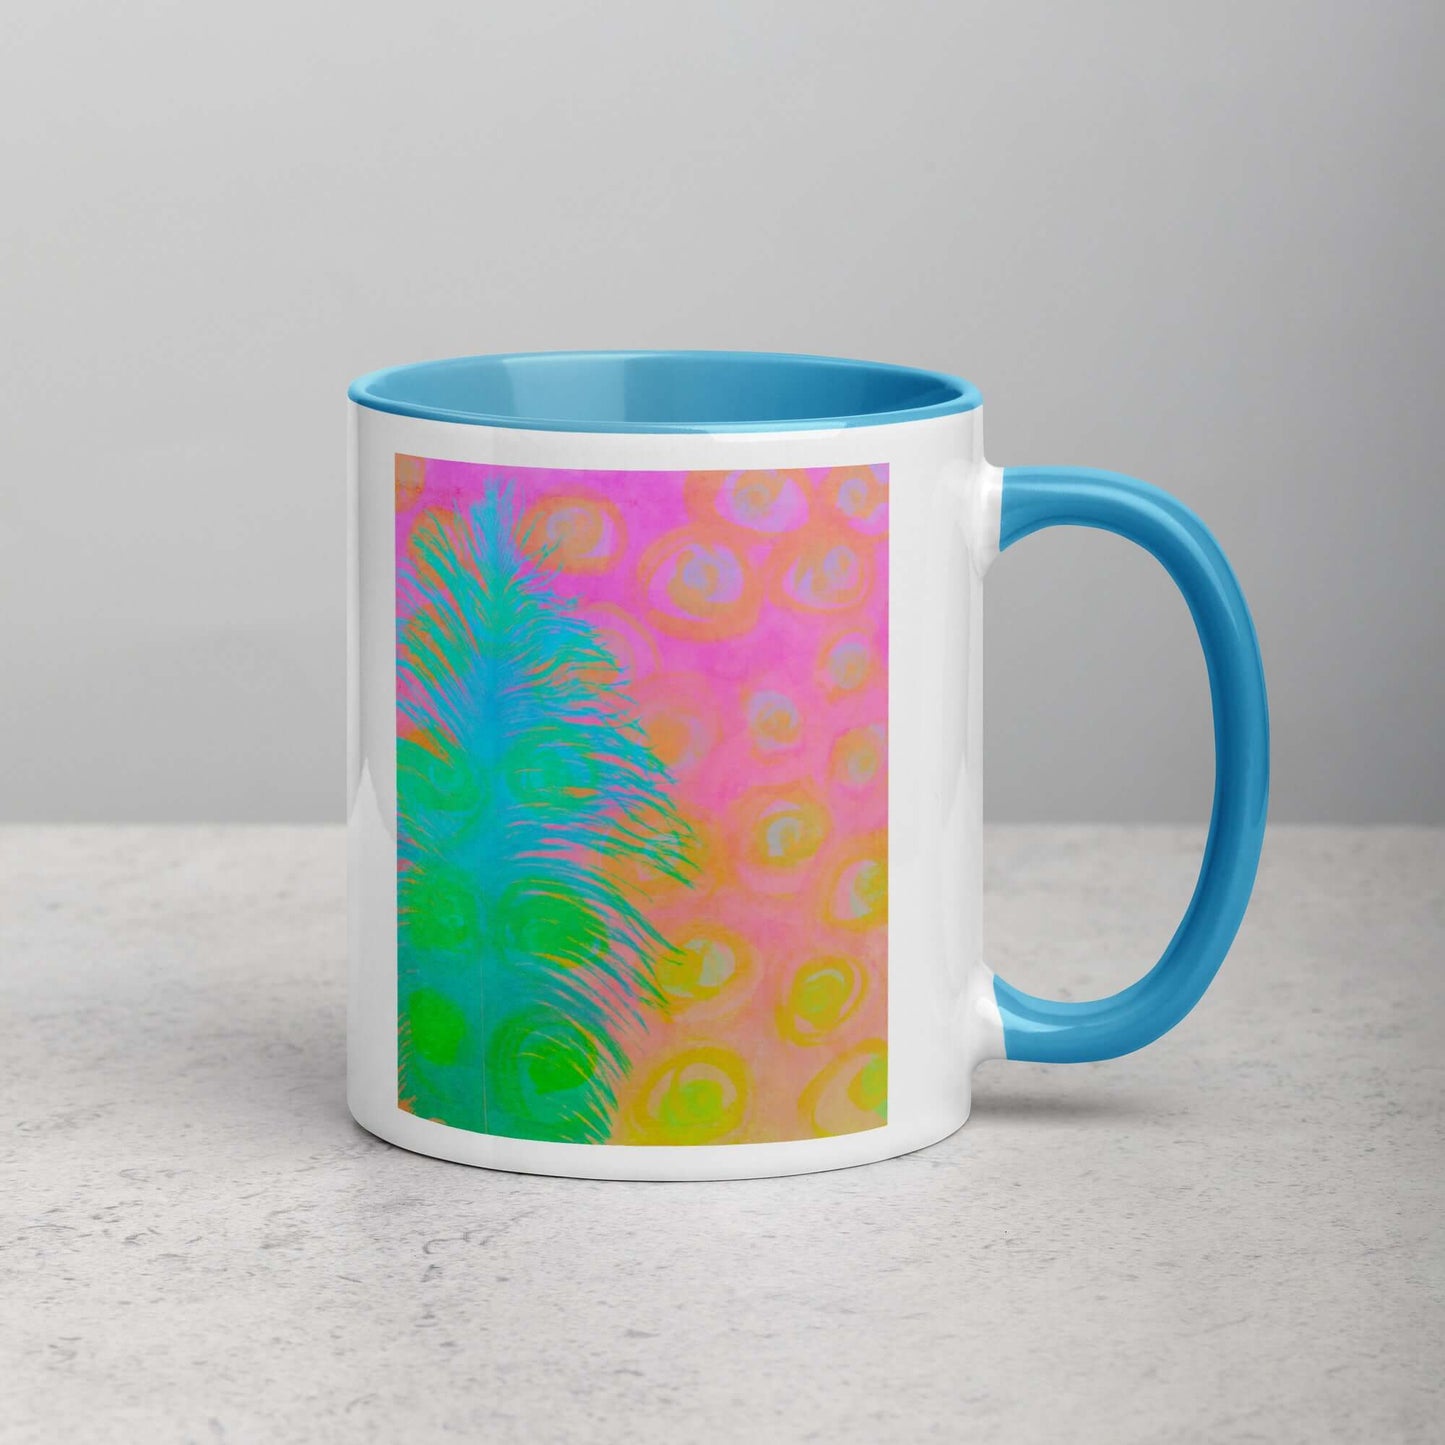 Bright Blue-Green Ostrich Feather on Pink and Yellow Background “My Other Half” Abstract Art Mug with Light Blue Color Inside Right. Handed Front View